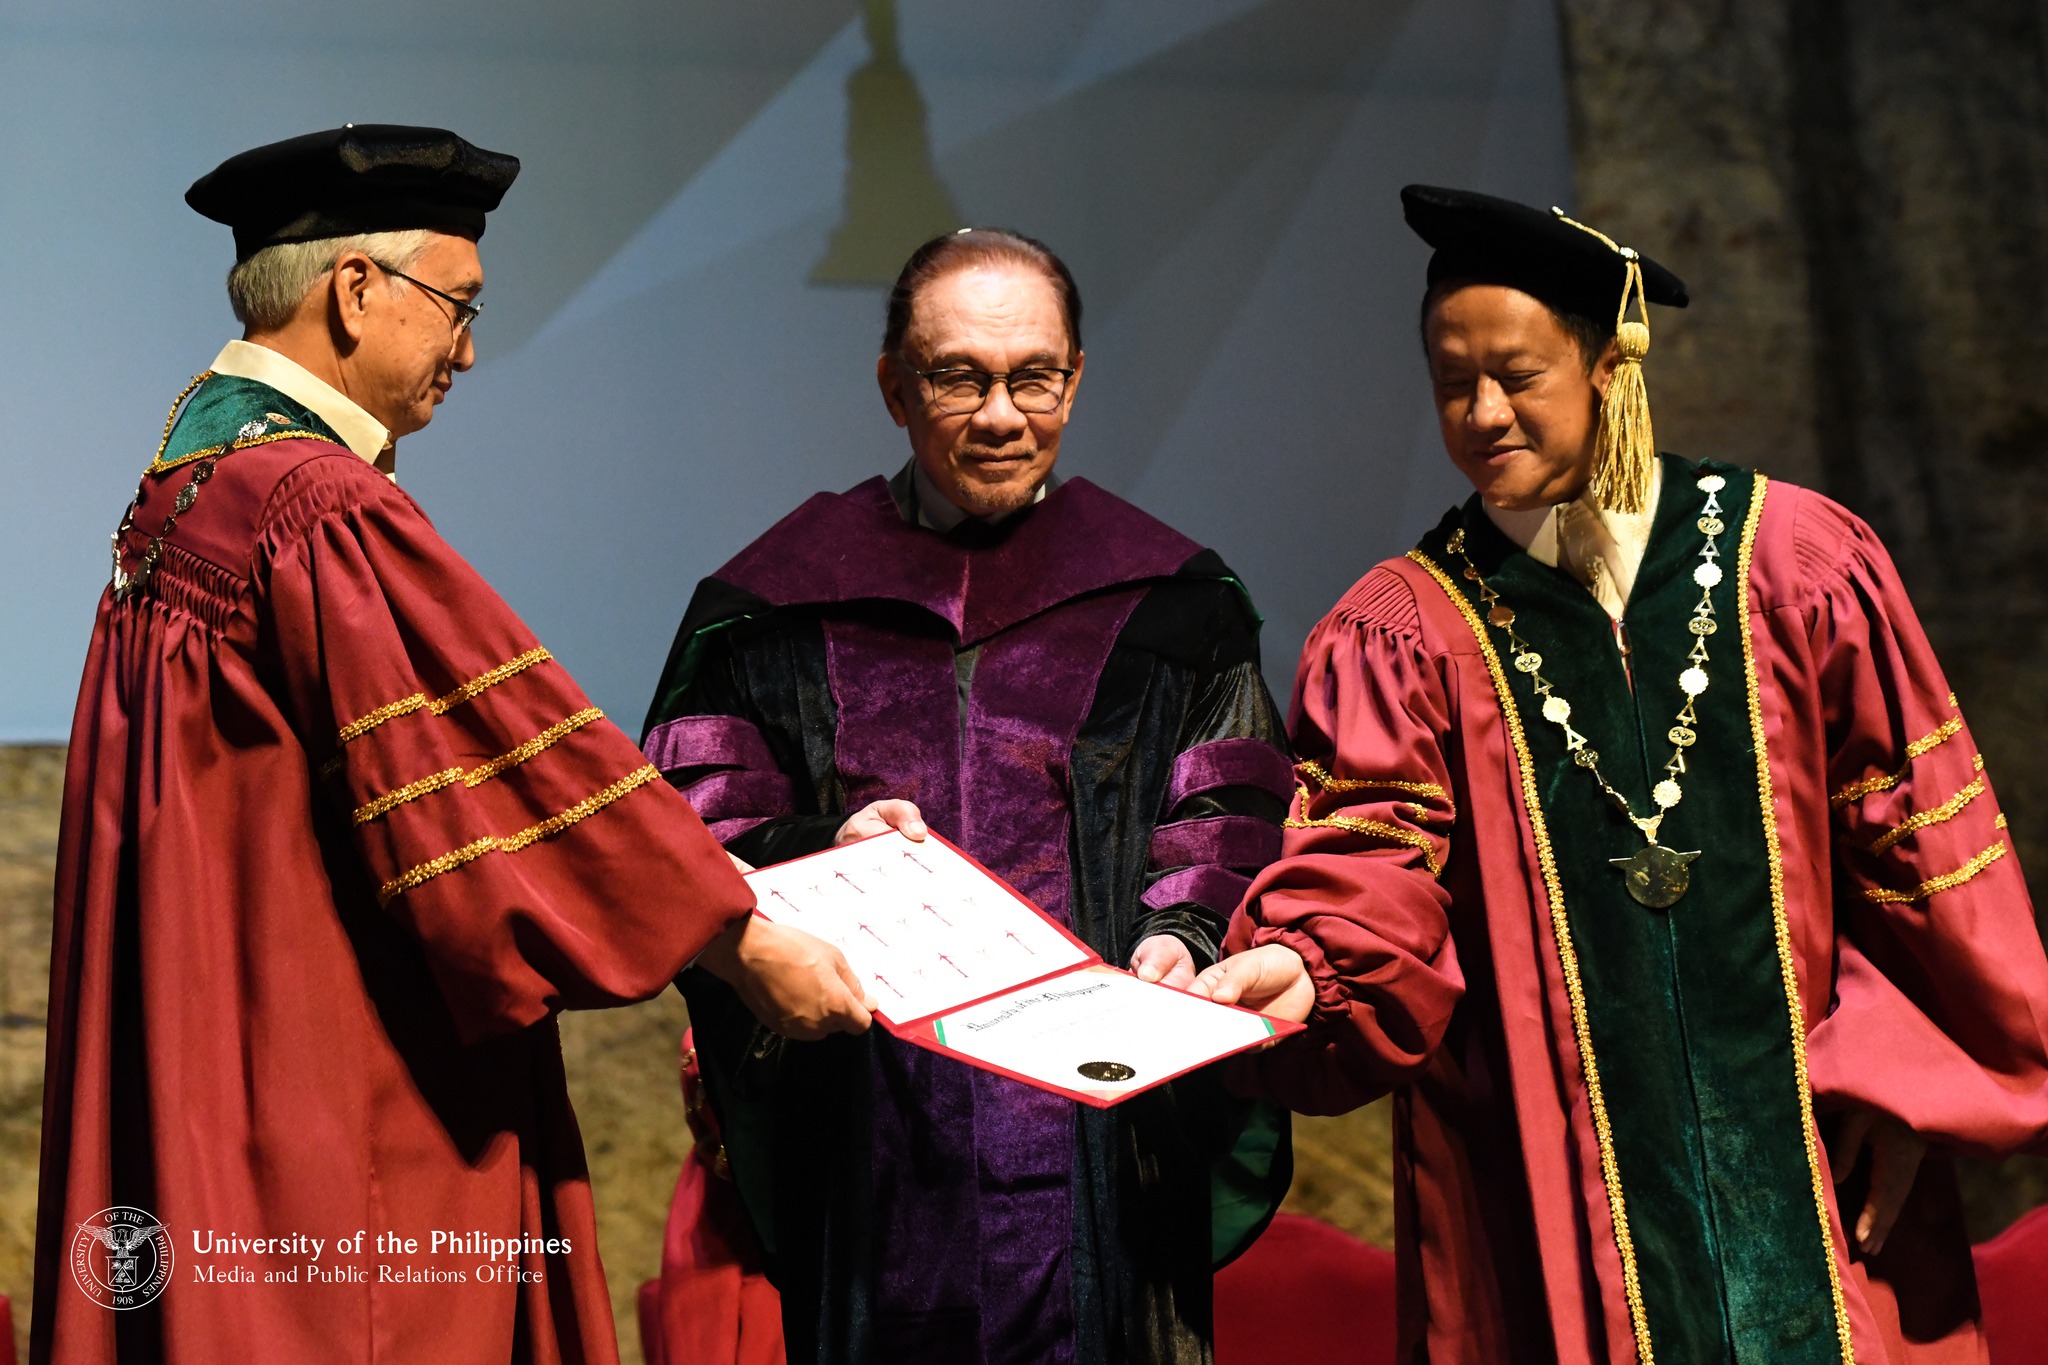 Pm anwar awarded doctorate degree 01